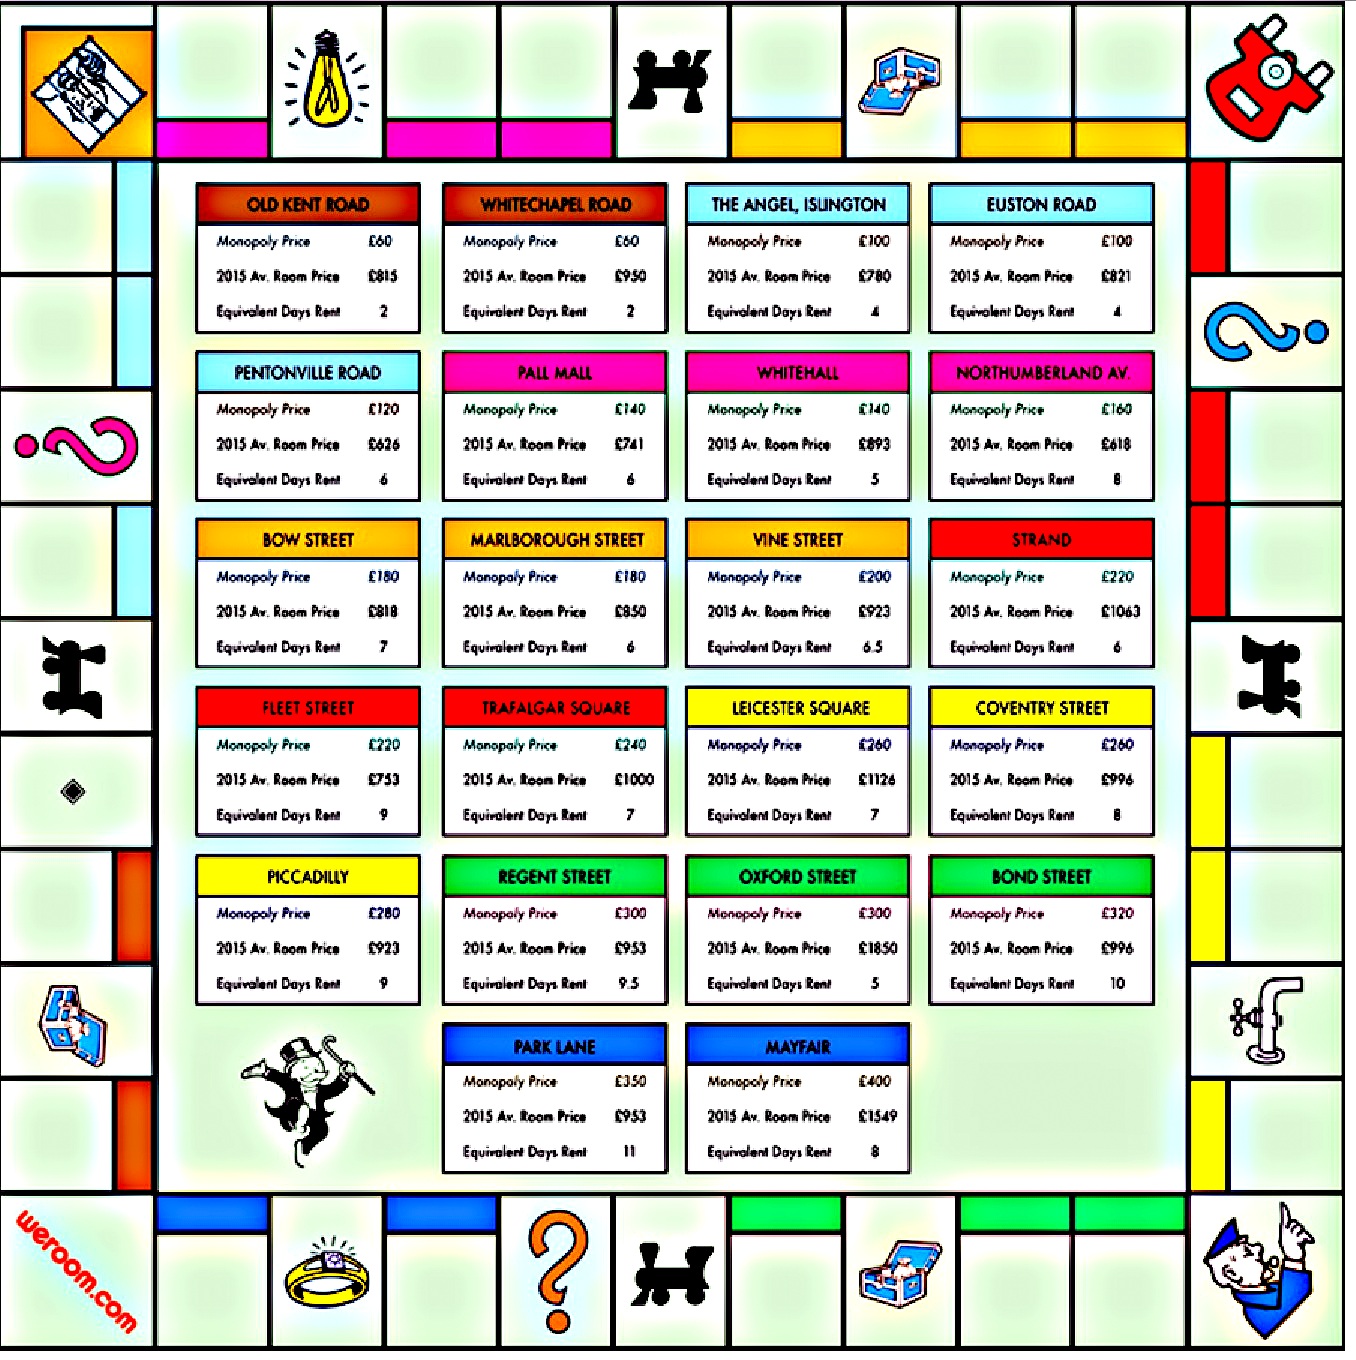 weroom-house-share-website-show-how-todays-uk-monopoly-board